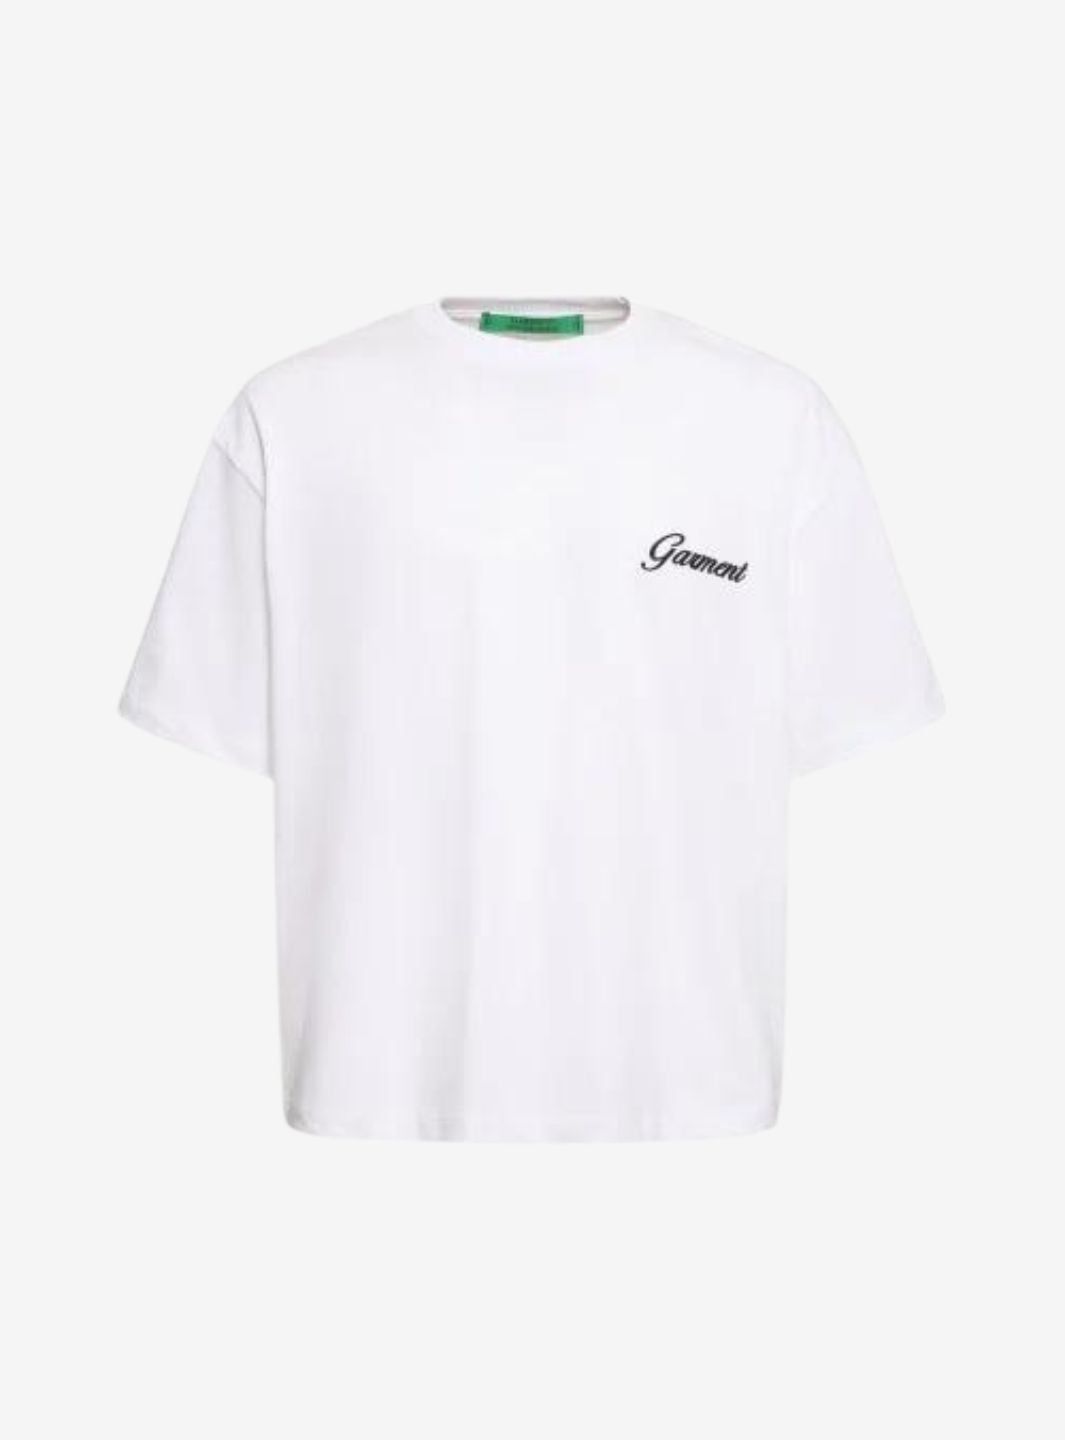 Garment-Workshop T-shirt If You Know You Know White 